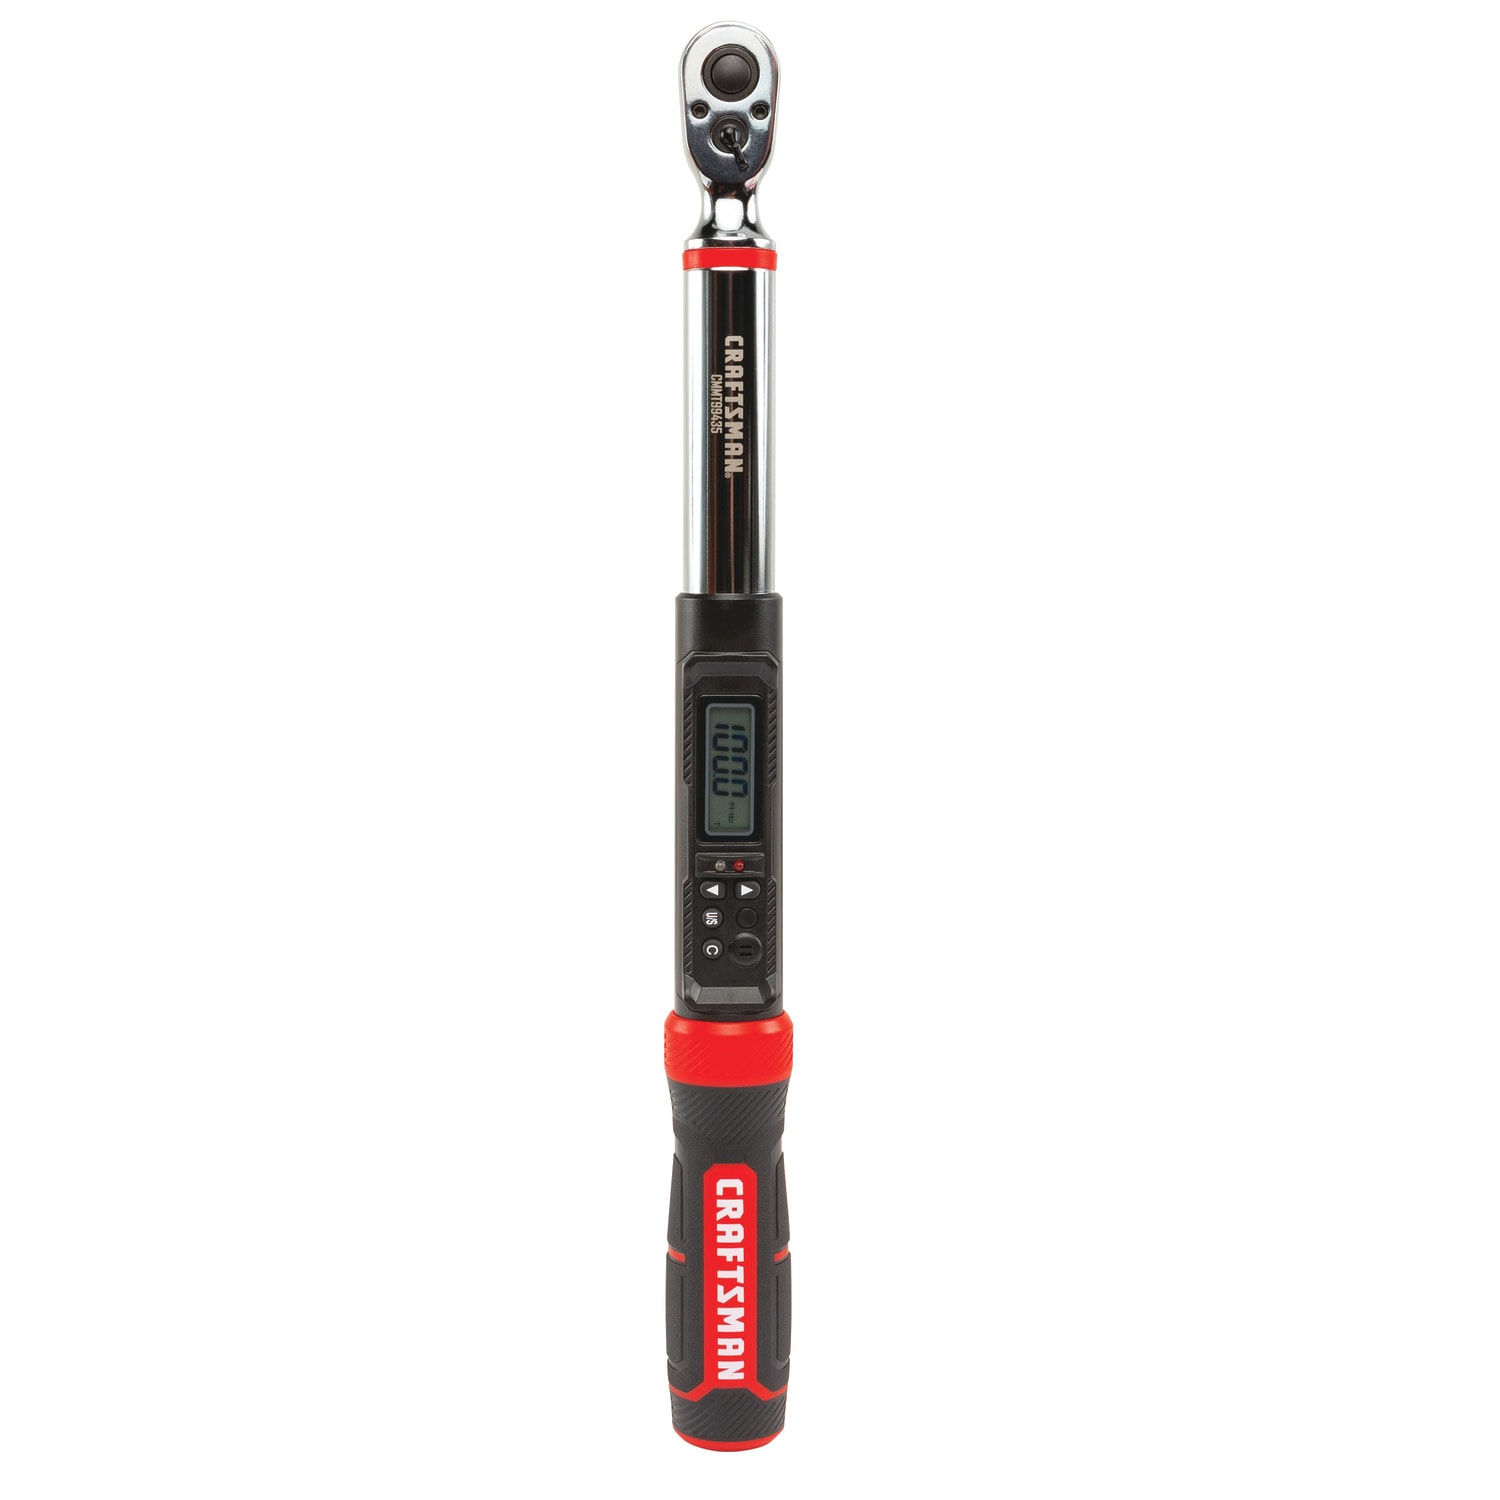 Craftsman 9-31425 20-150 ft lbs 1/2 Drive MicroTork Torque Wrench 